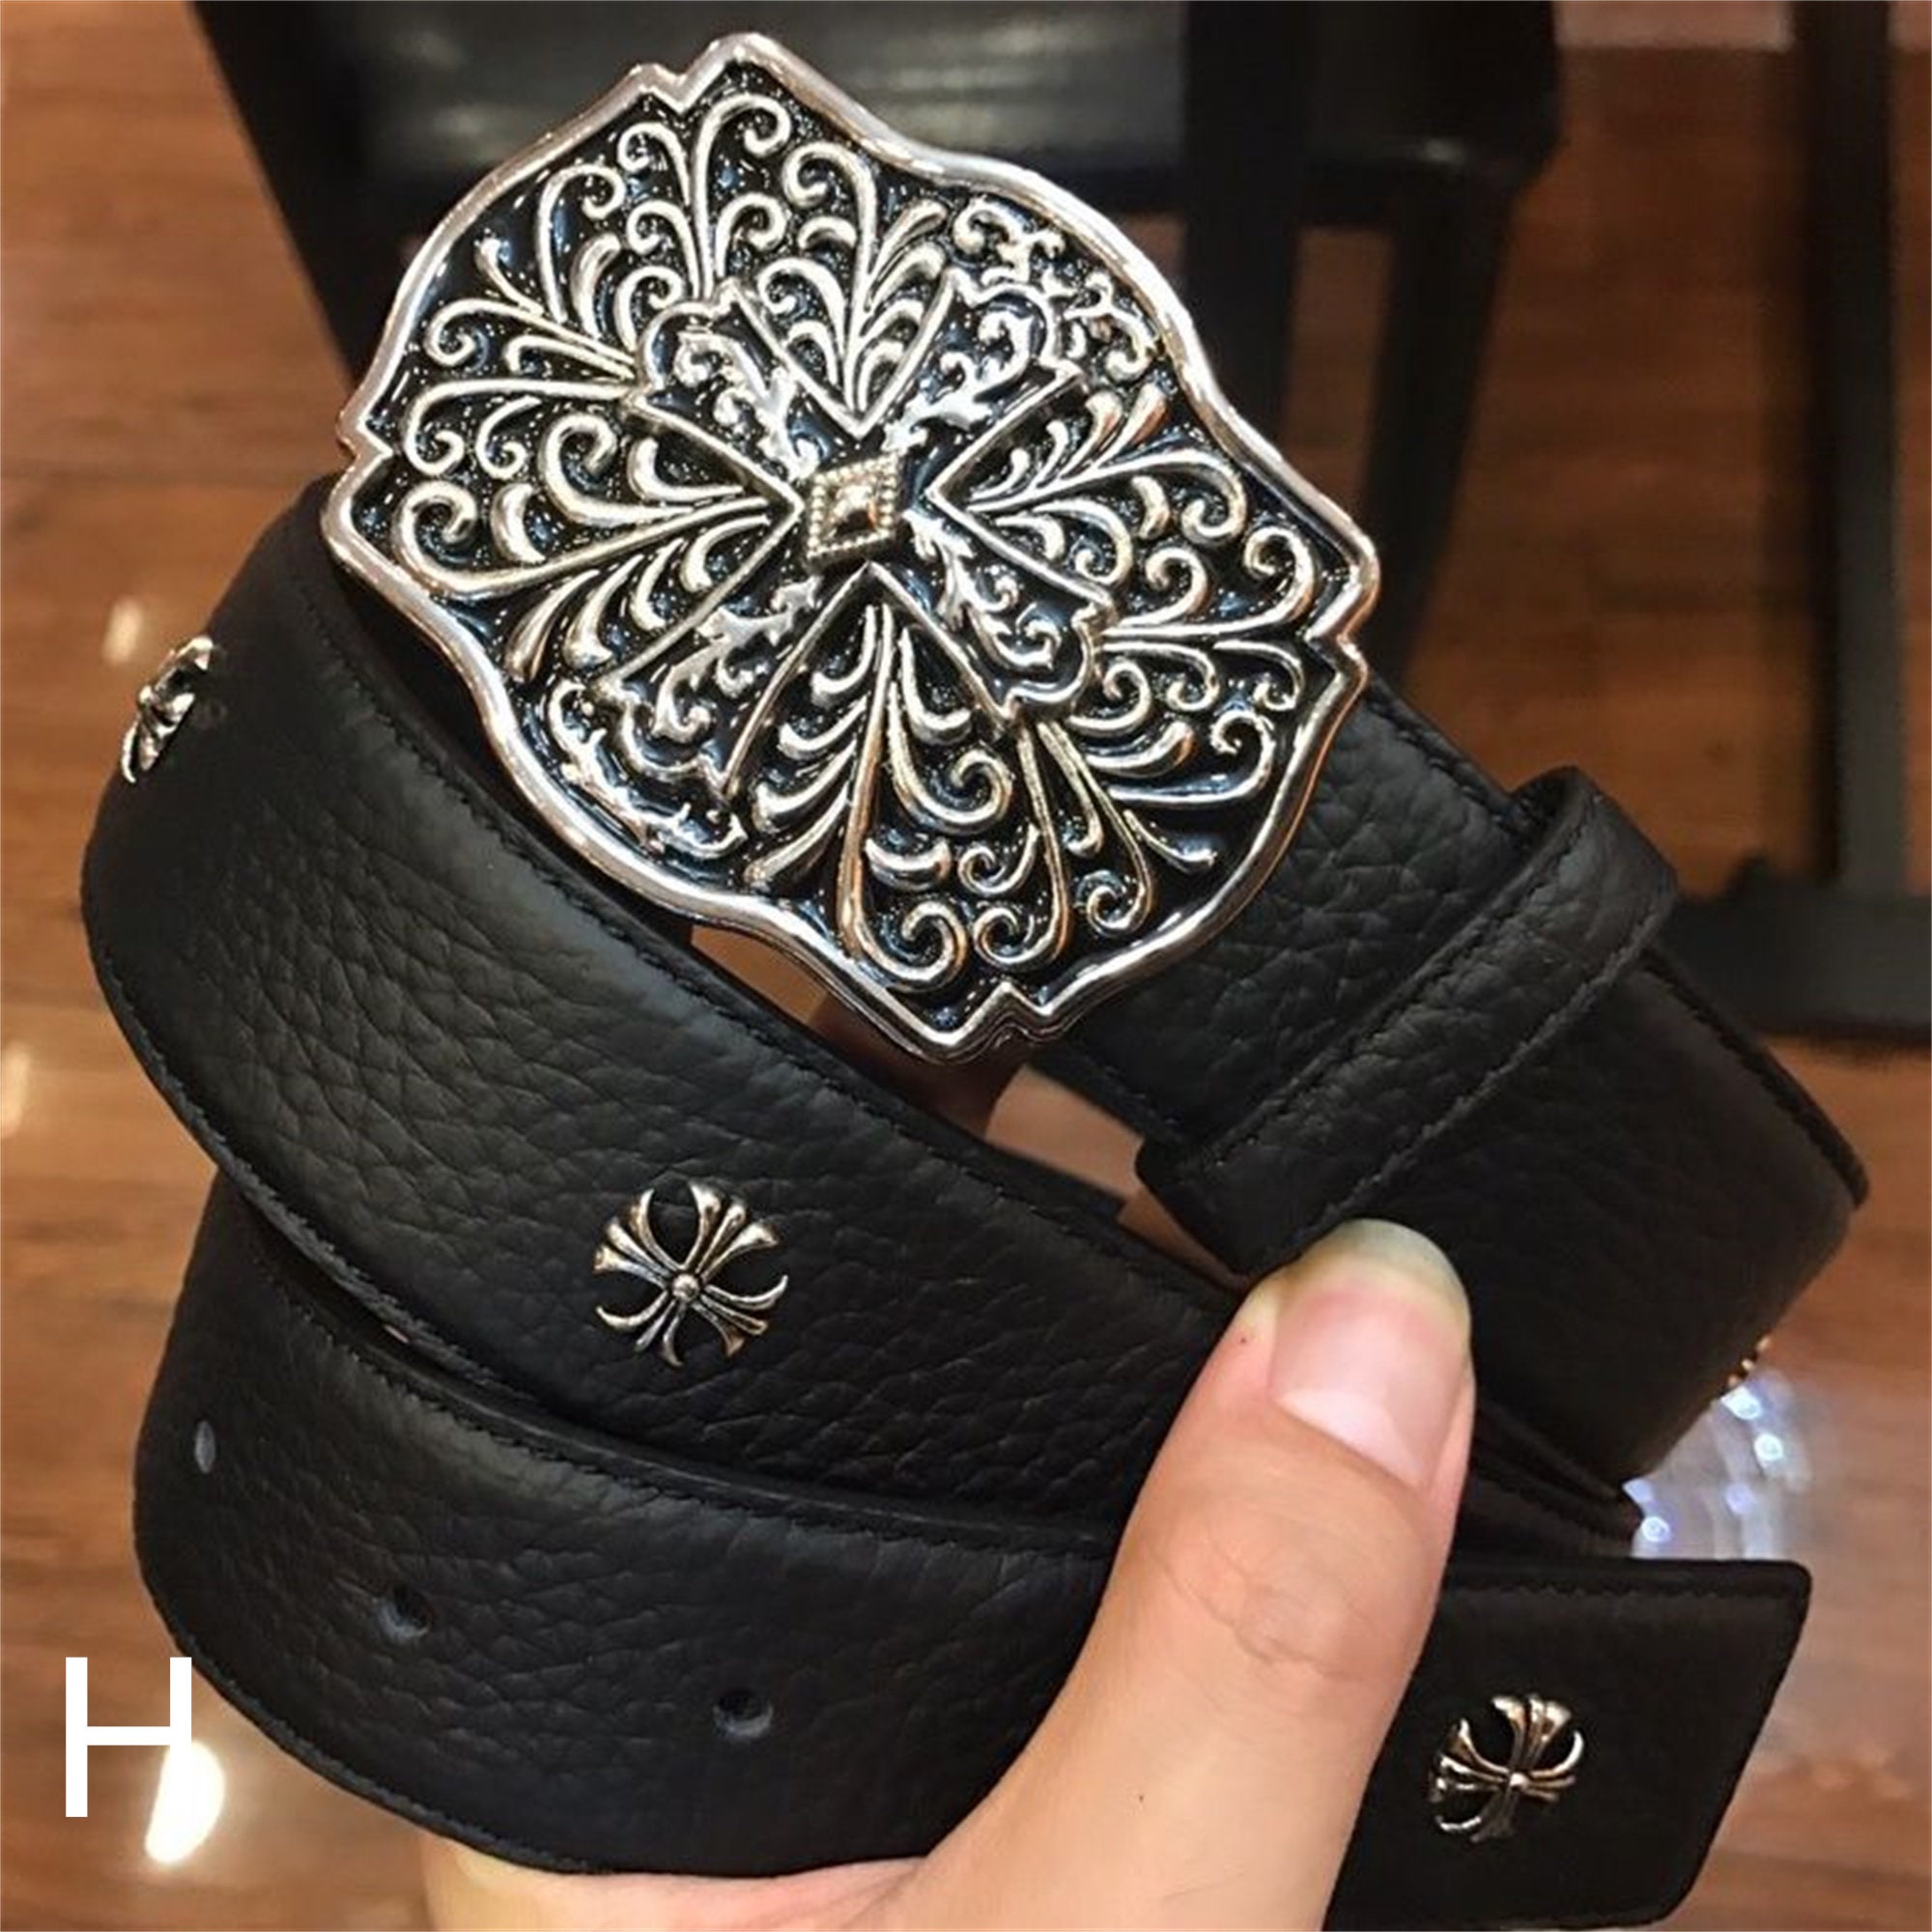 CHROME HEARTS - Chrome Hearts Pebble Leather Belt  HBX - Globally Curated  Fashion and Lifestyle by Hypebeast